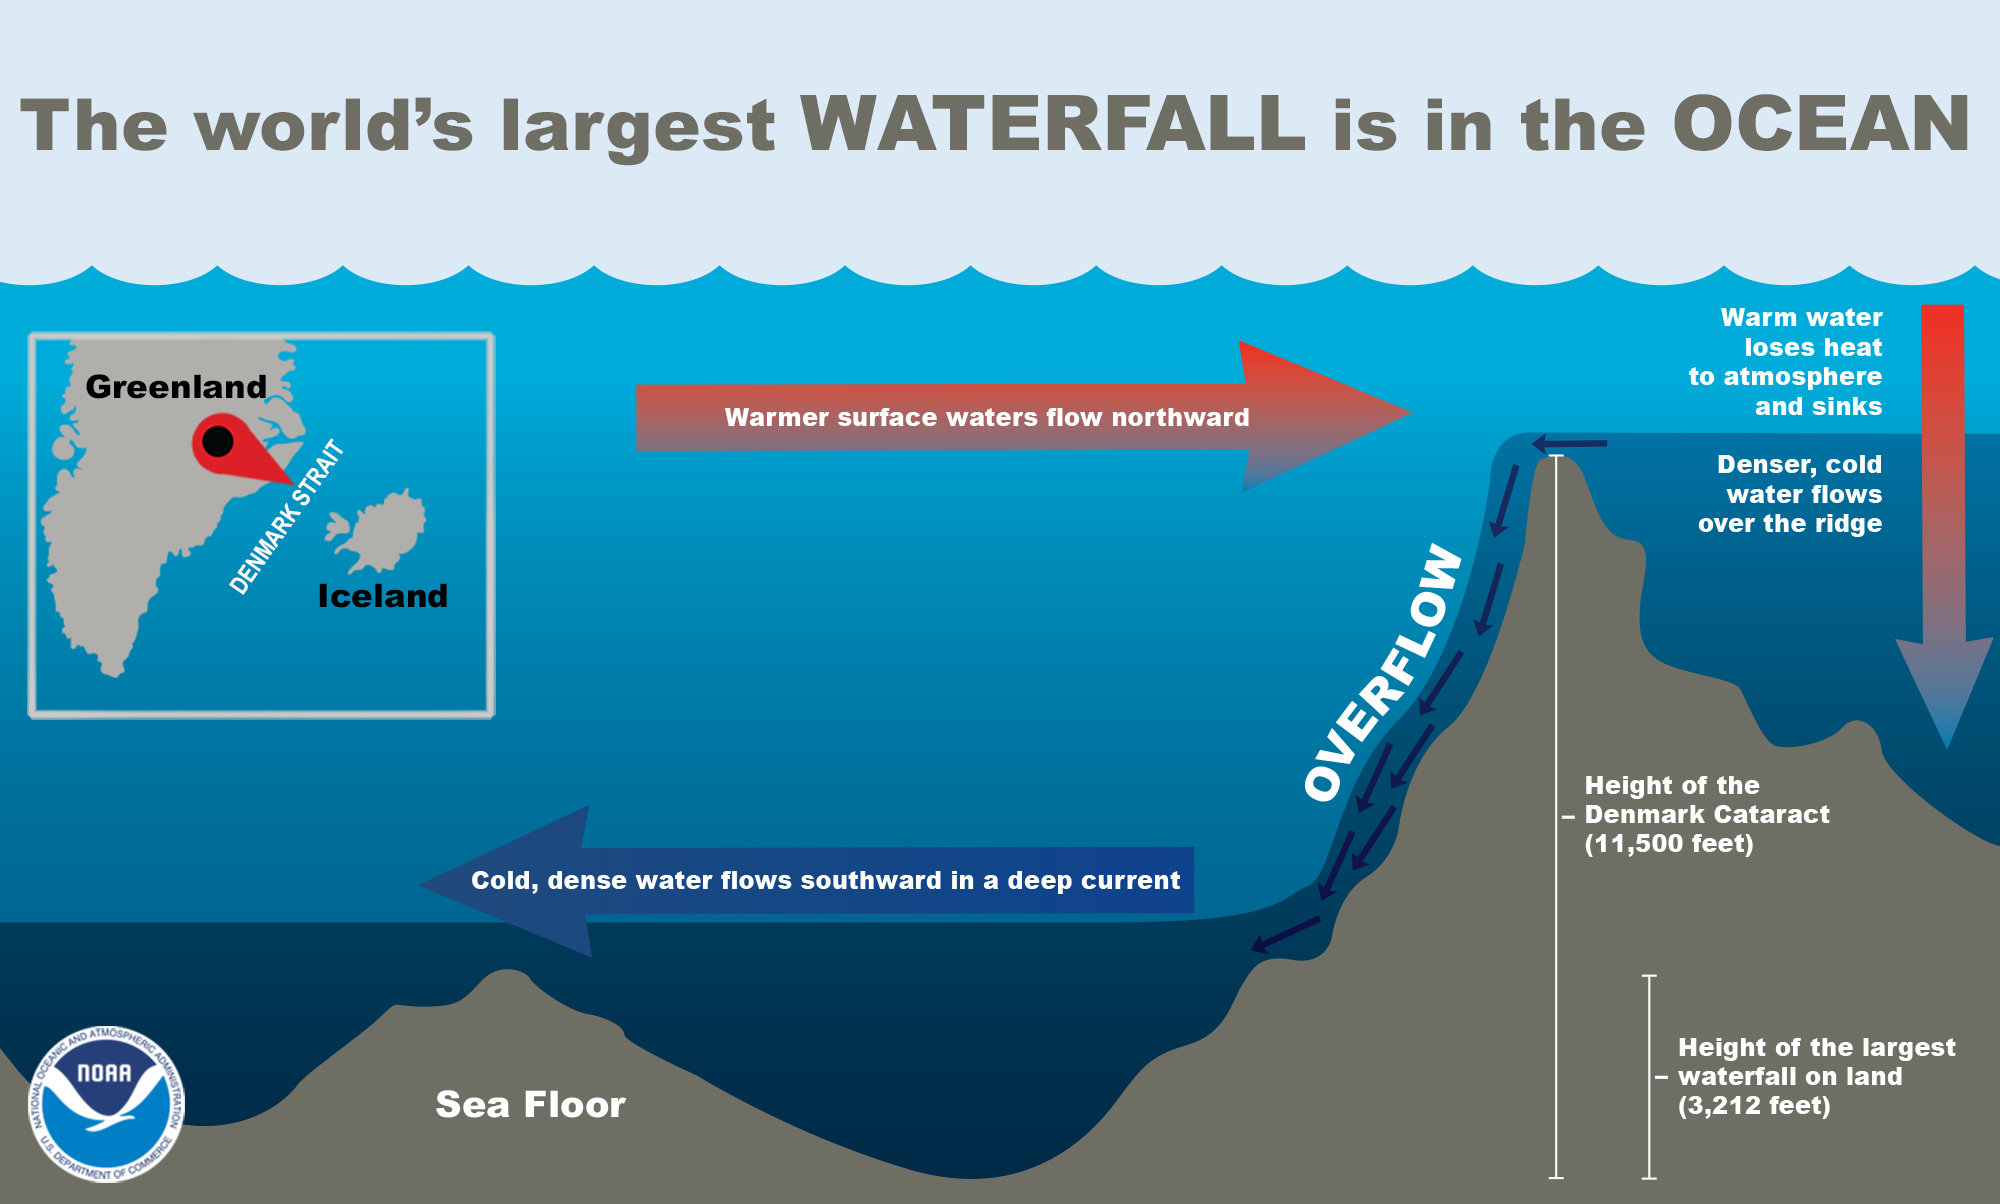 Earth’s largest waterfall is in the ocean between Greenland and Iceland